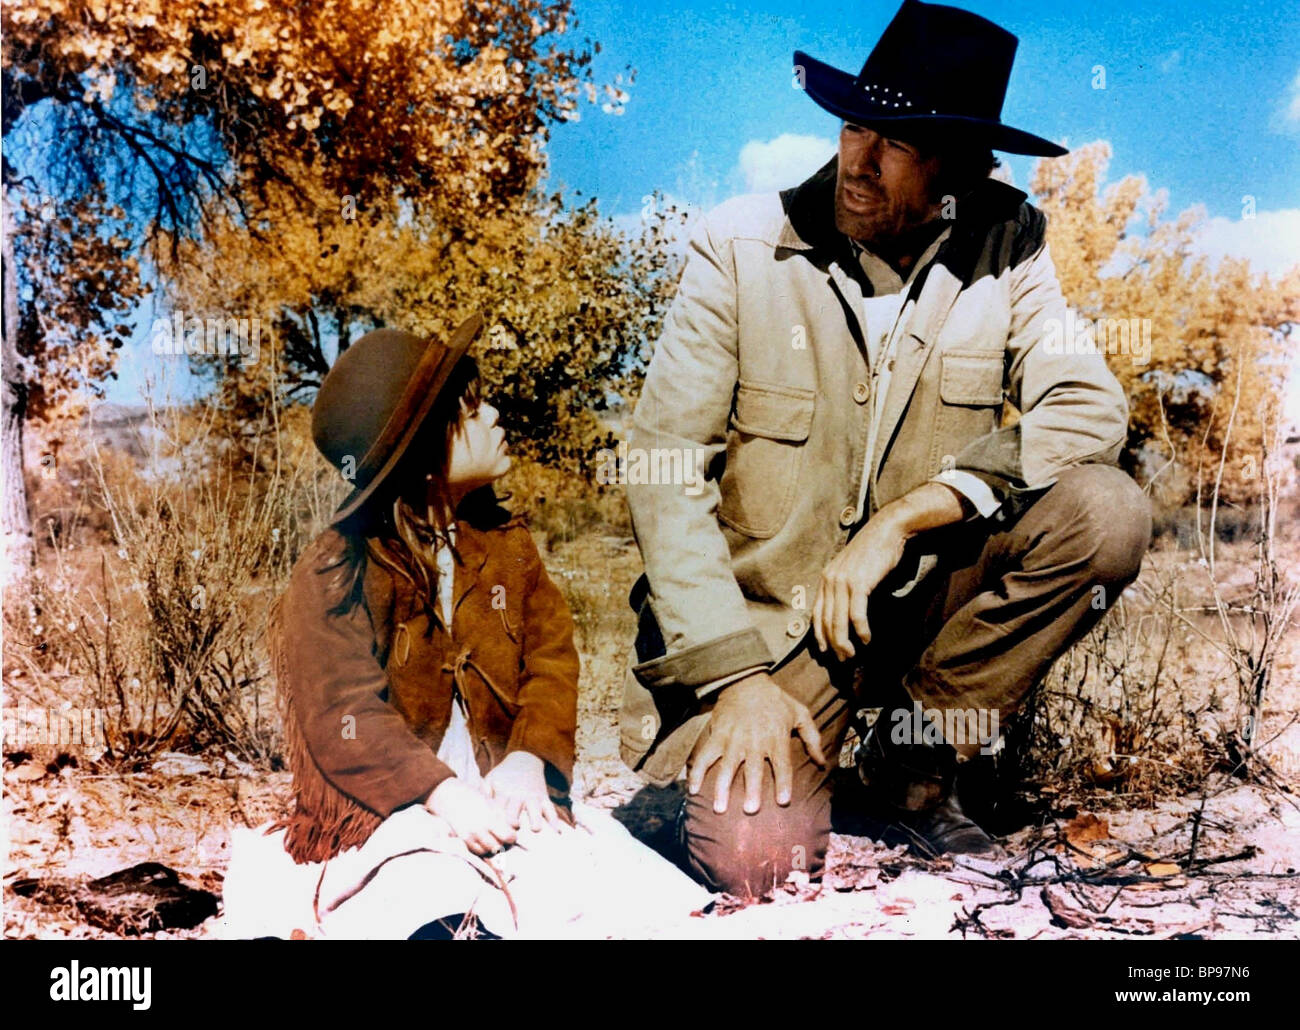 DAWN LYN, GREGORY PECK, SHOOT OUT, 1971 Stock Photo - Alamy.